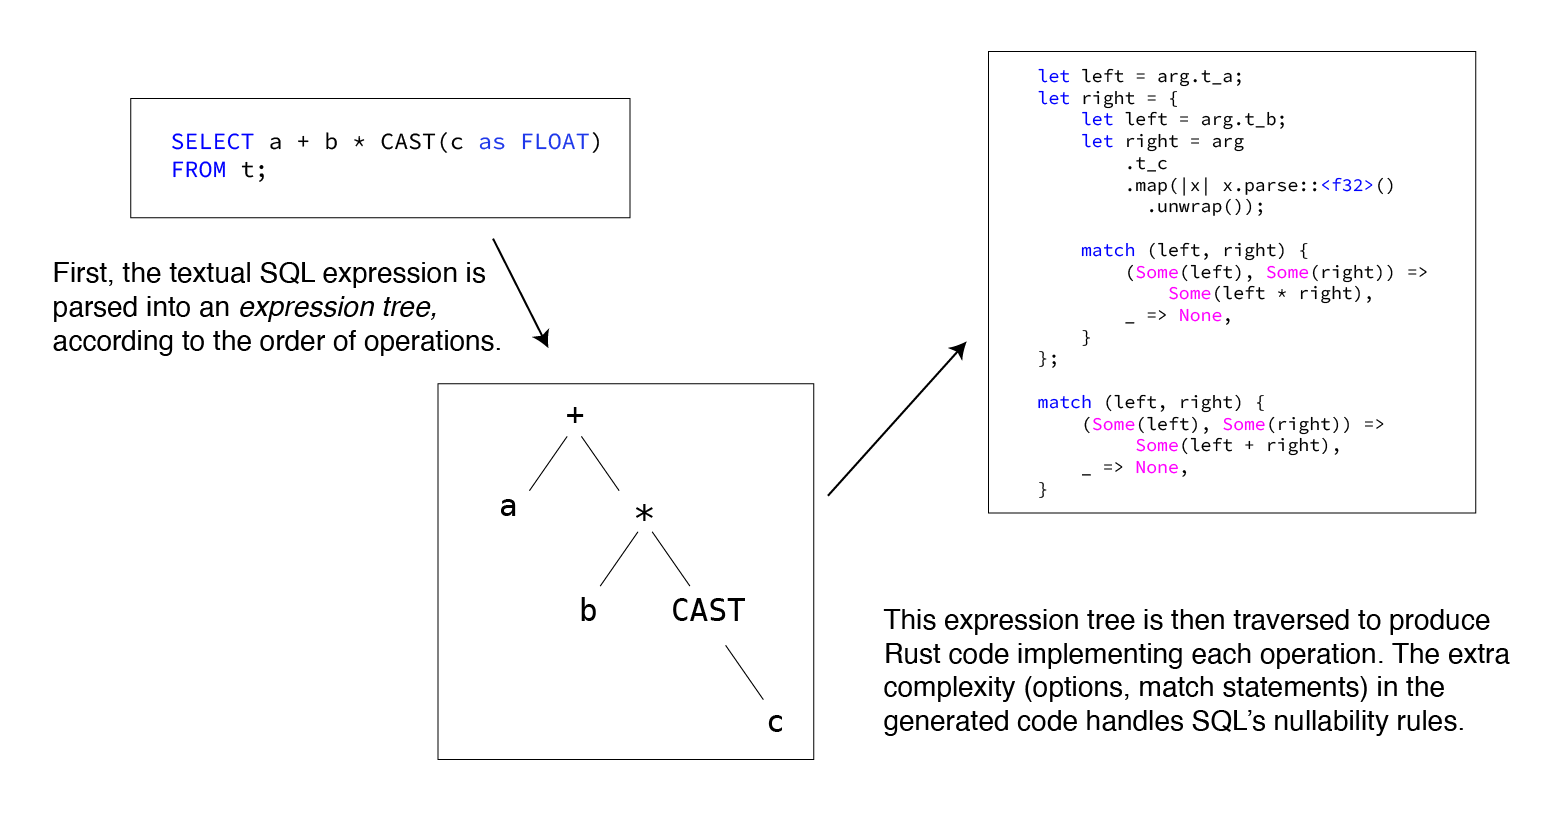 Diagram showing the process of parsing an expression and producing Rust code from it